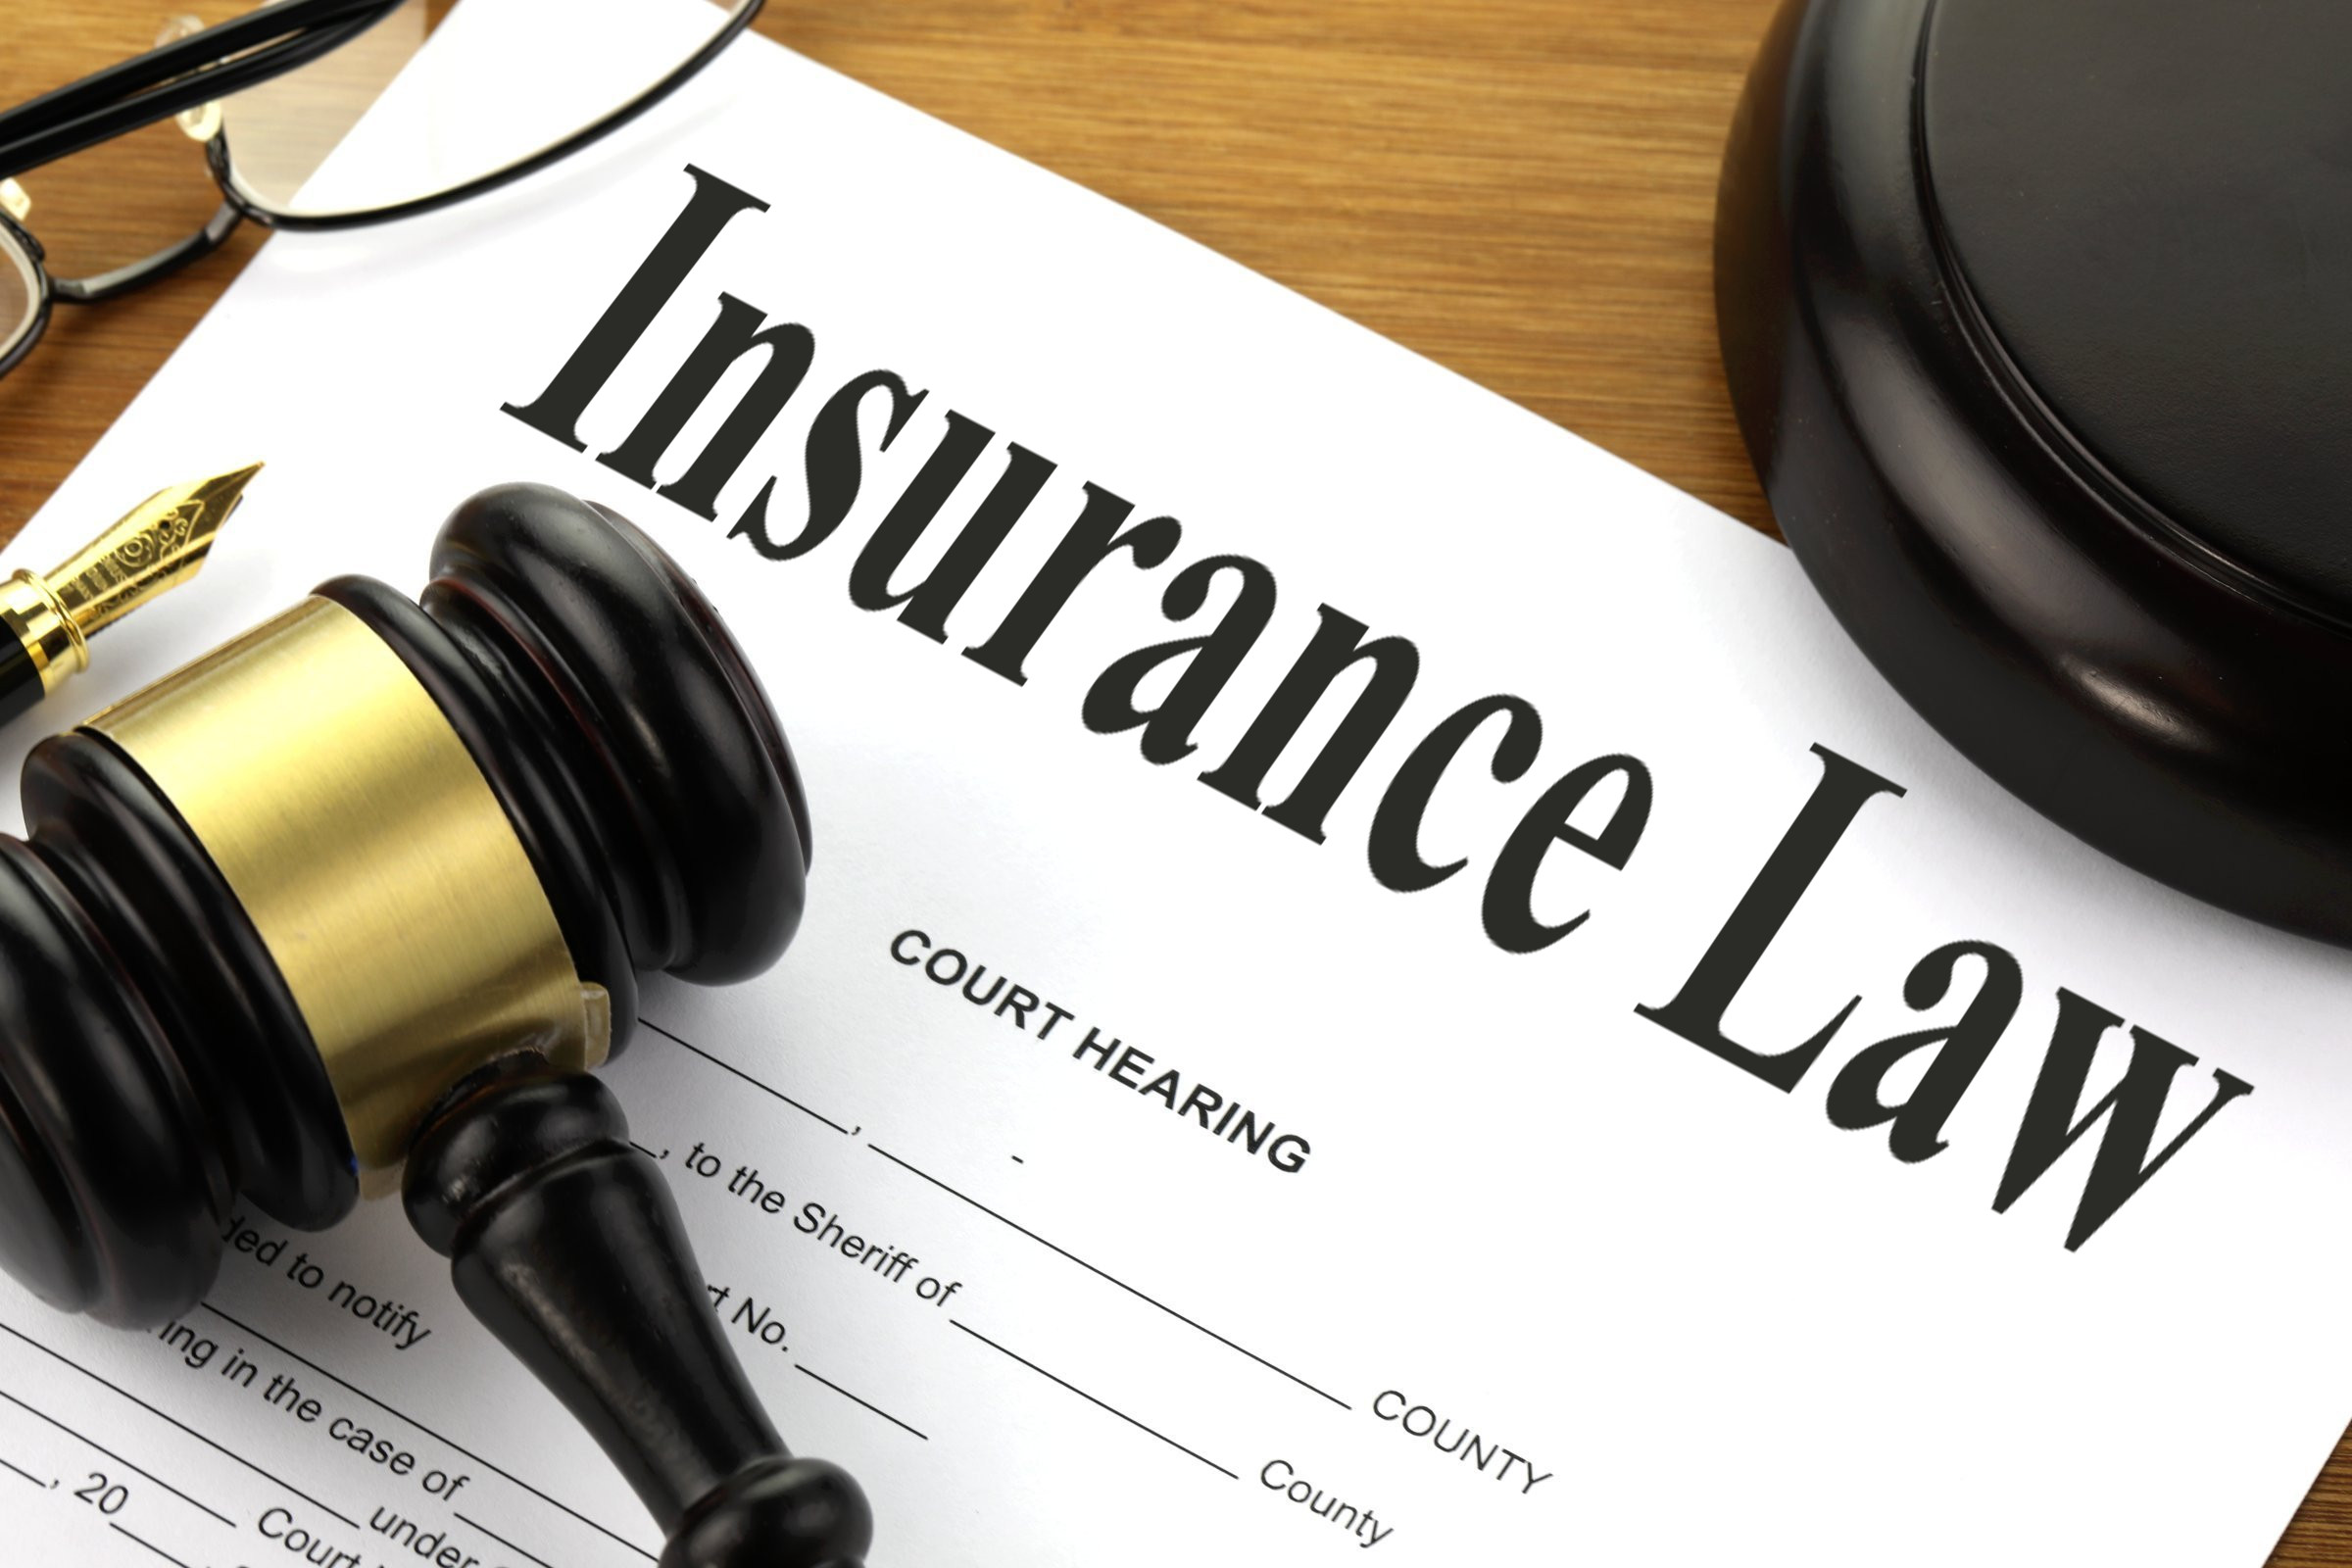 Insurance Law - Free of Charge Creative Commons Legal 1 image